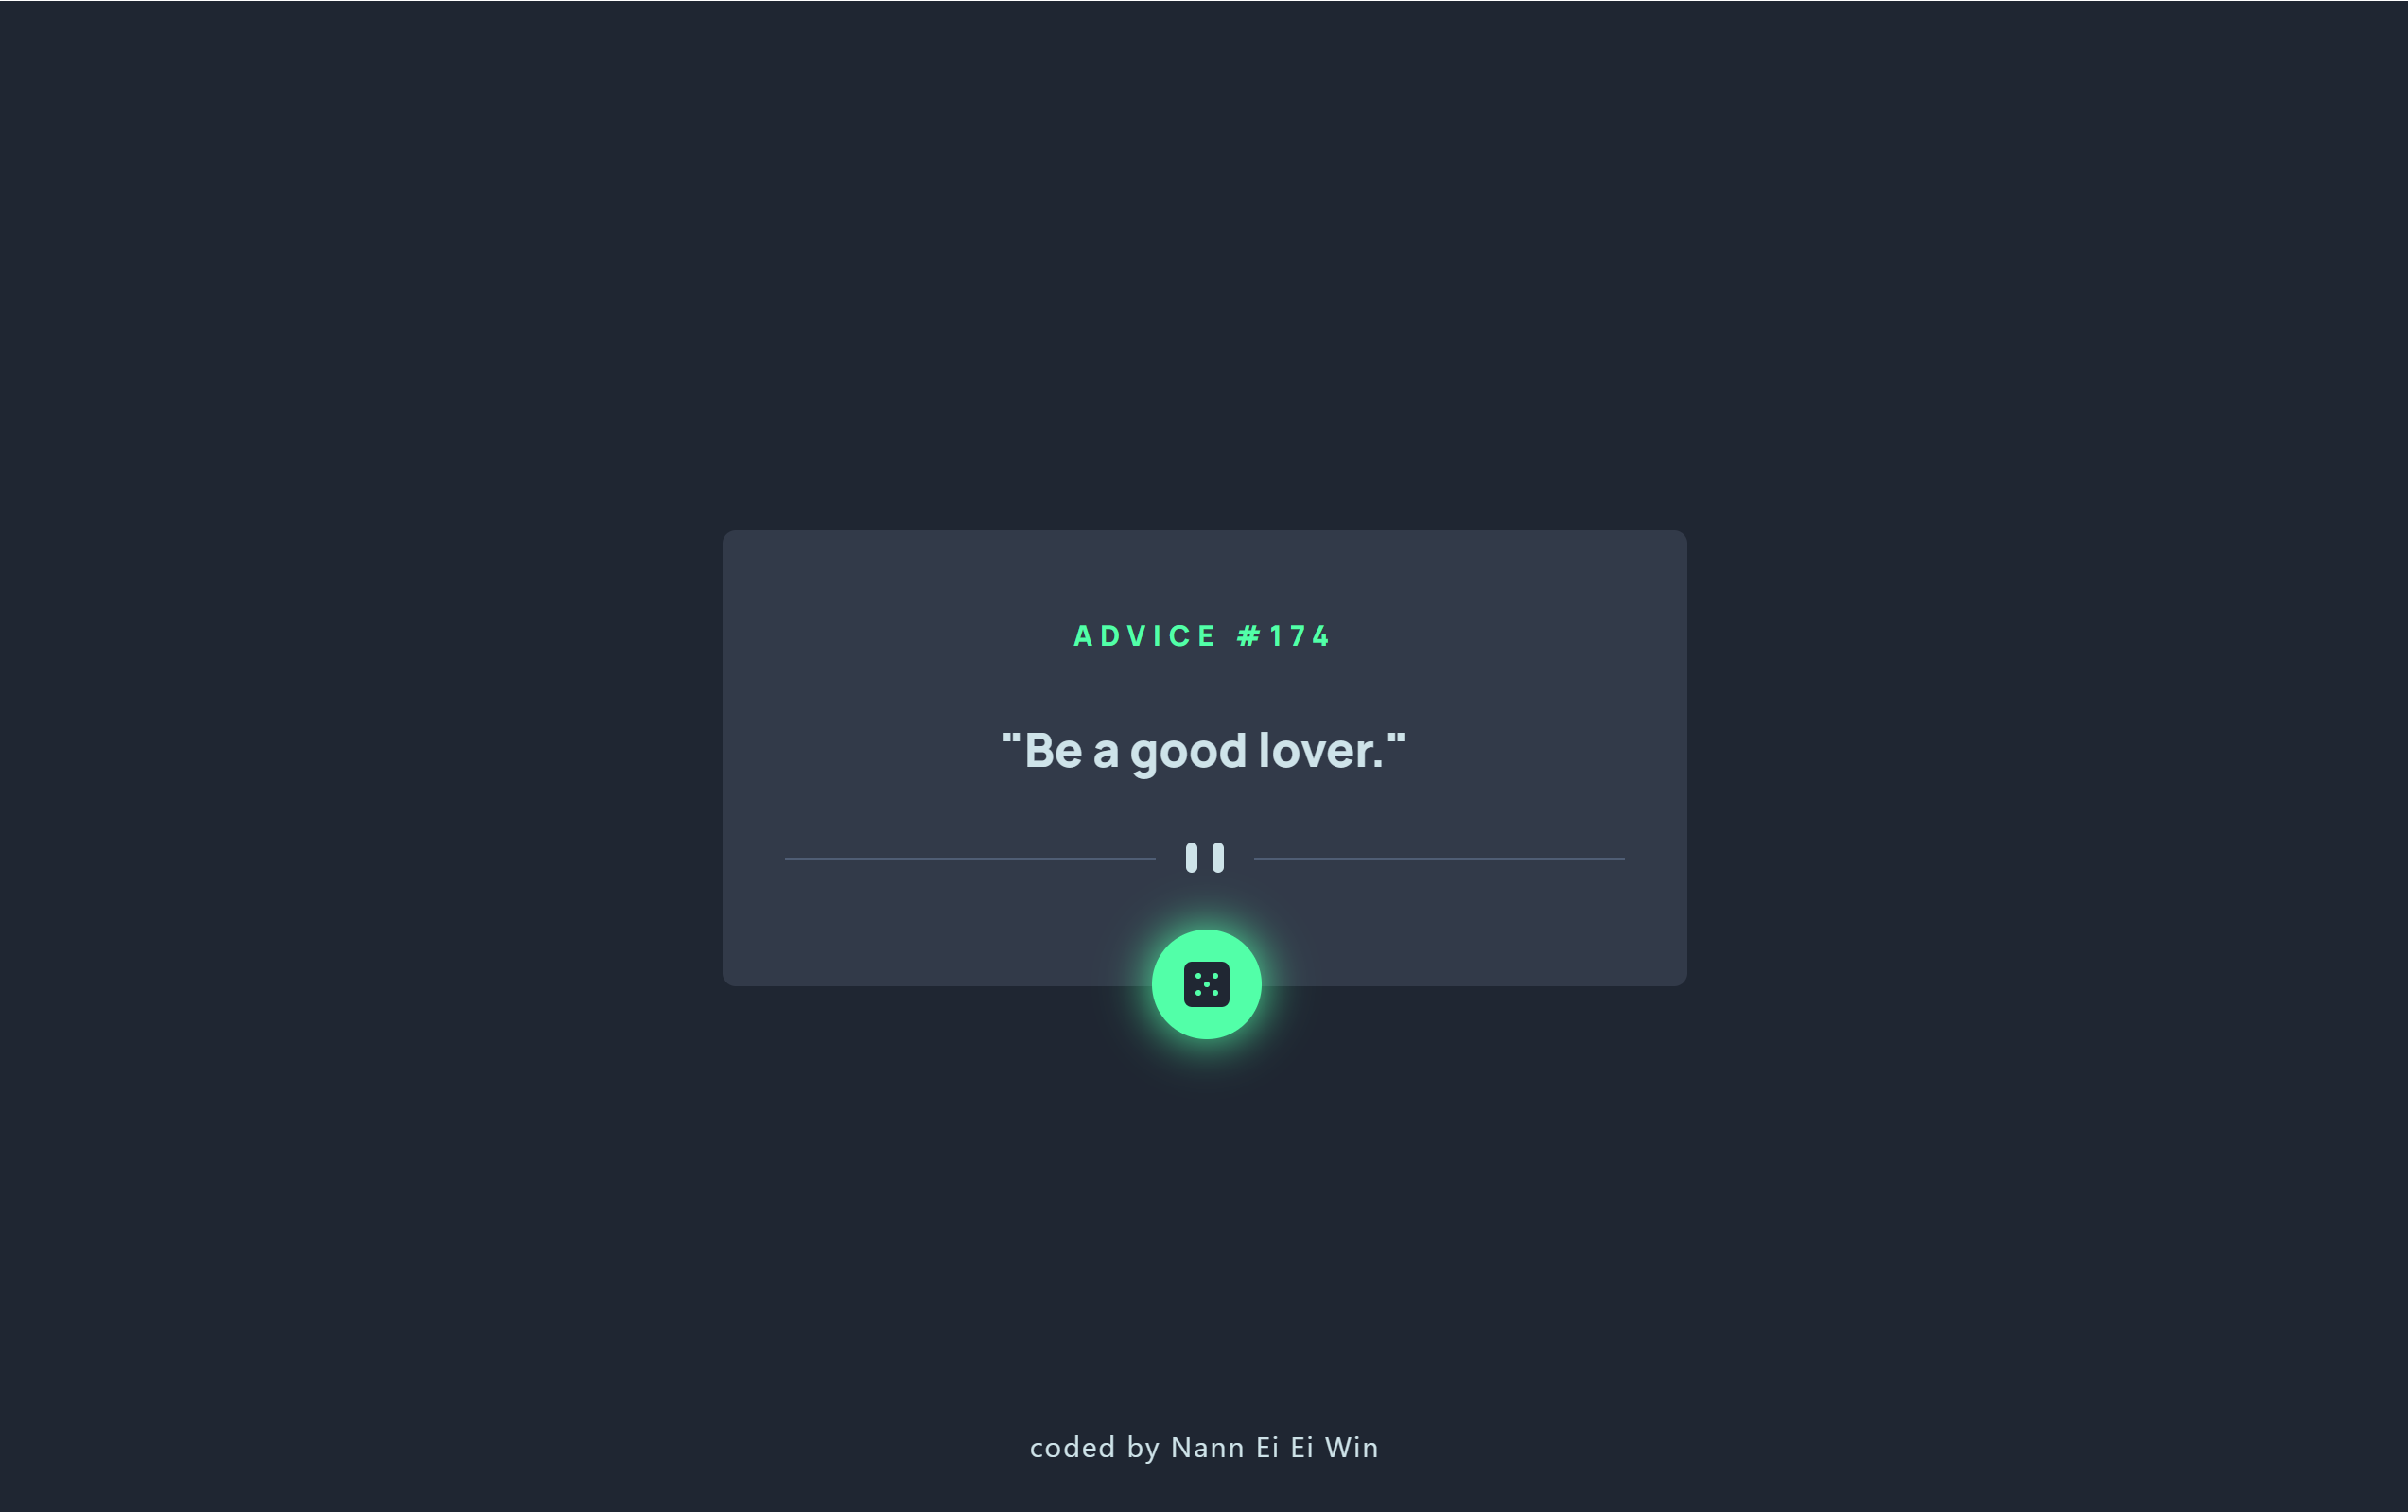 An advice generator app which can give you random advice